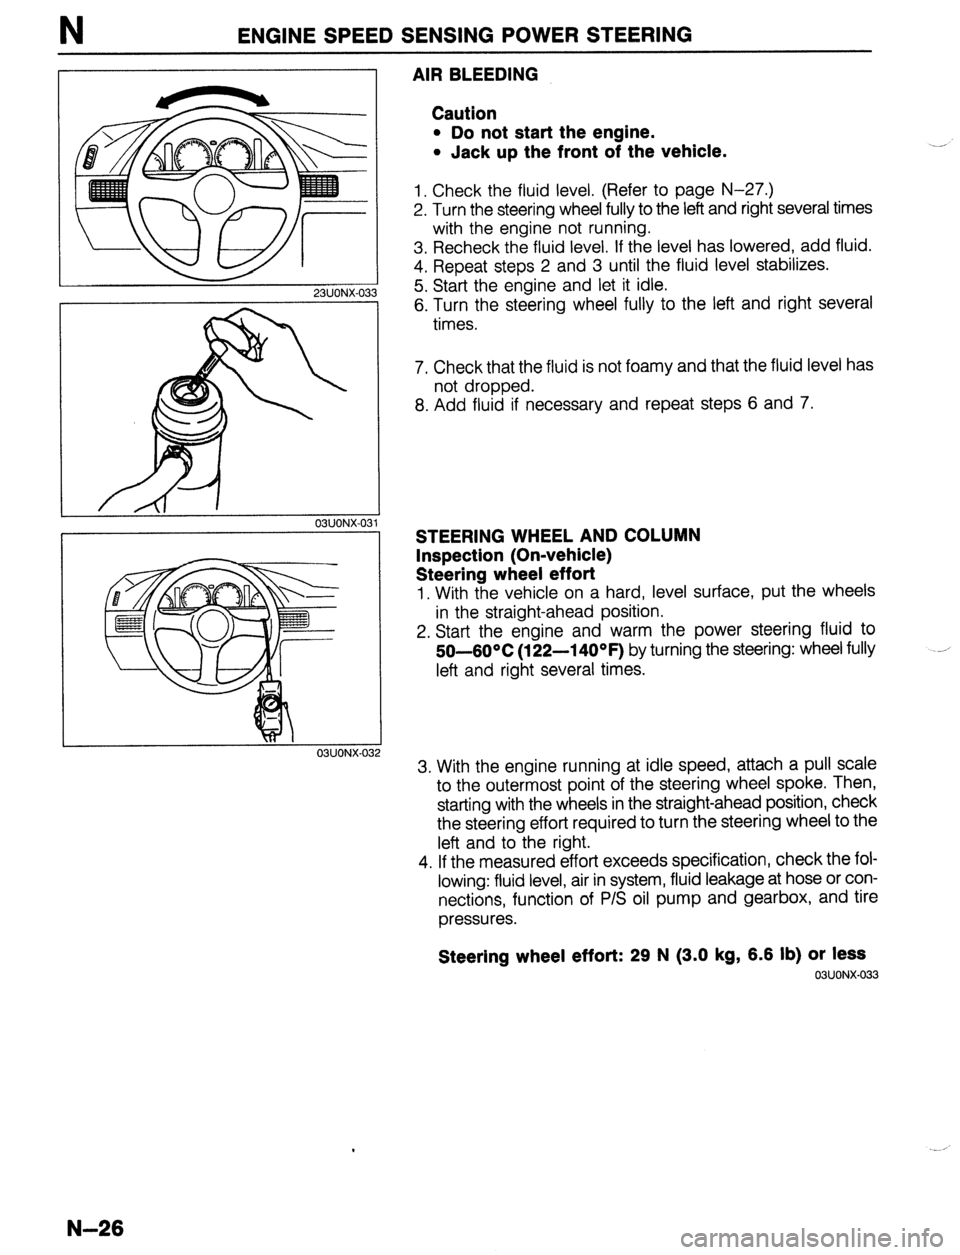 MAZDA PROTEGE 1992  Workshop Manual ENGINE SPEED SENSING POWER STEERING 
23UONX-03 
03UONX-032 
AIR BLEEDING 
Caution 
l Do not start the engine. 
l Jack up the front of the vehicle. 
1. Check the fluid level. (Refer to page N-27.) 
2. 